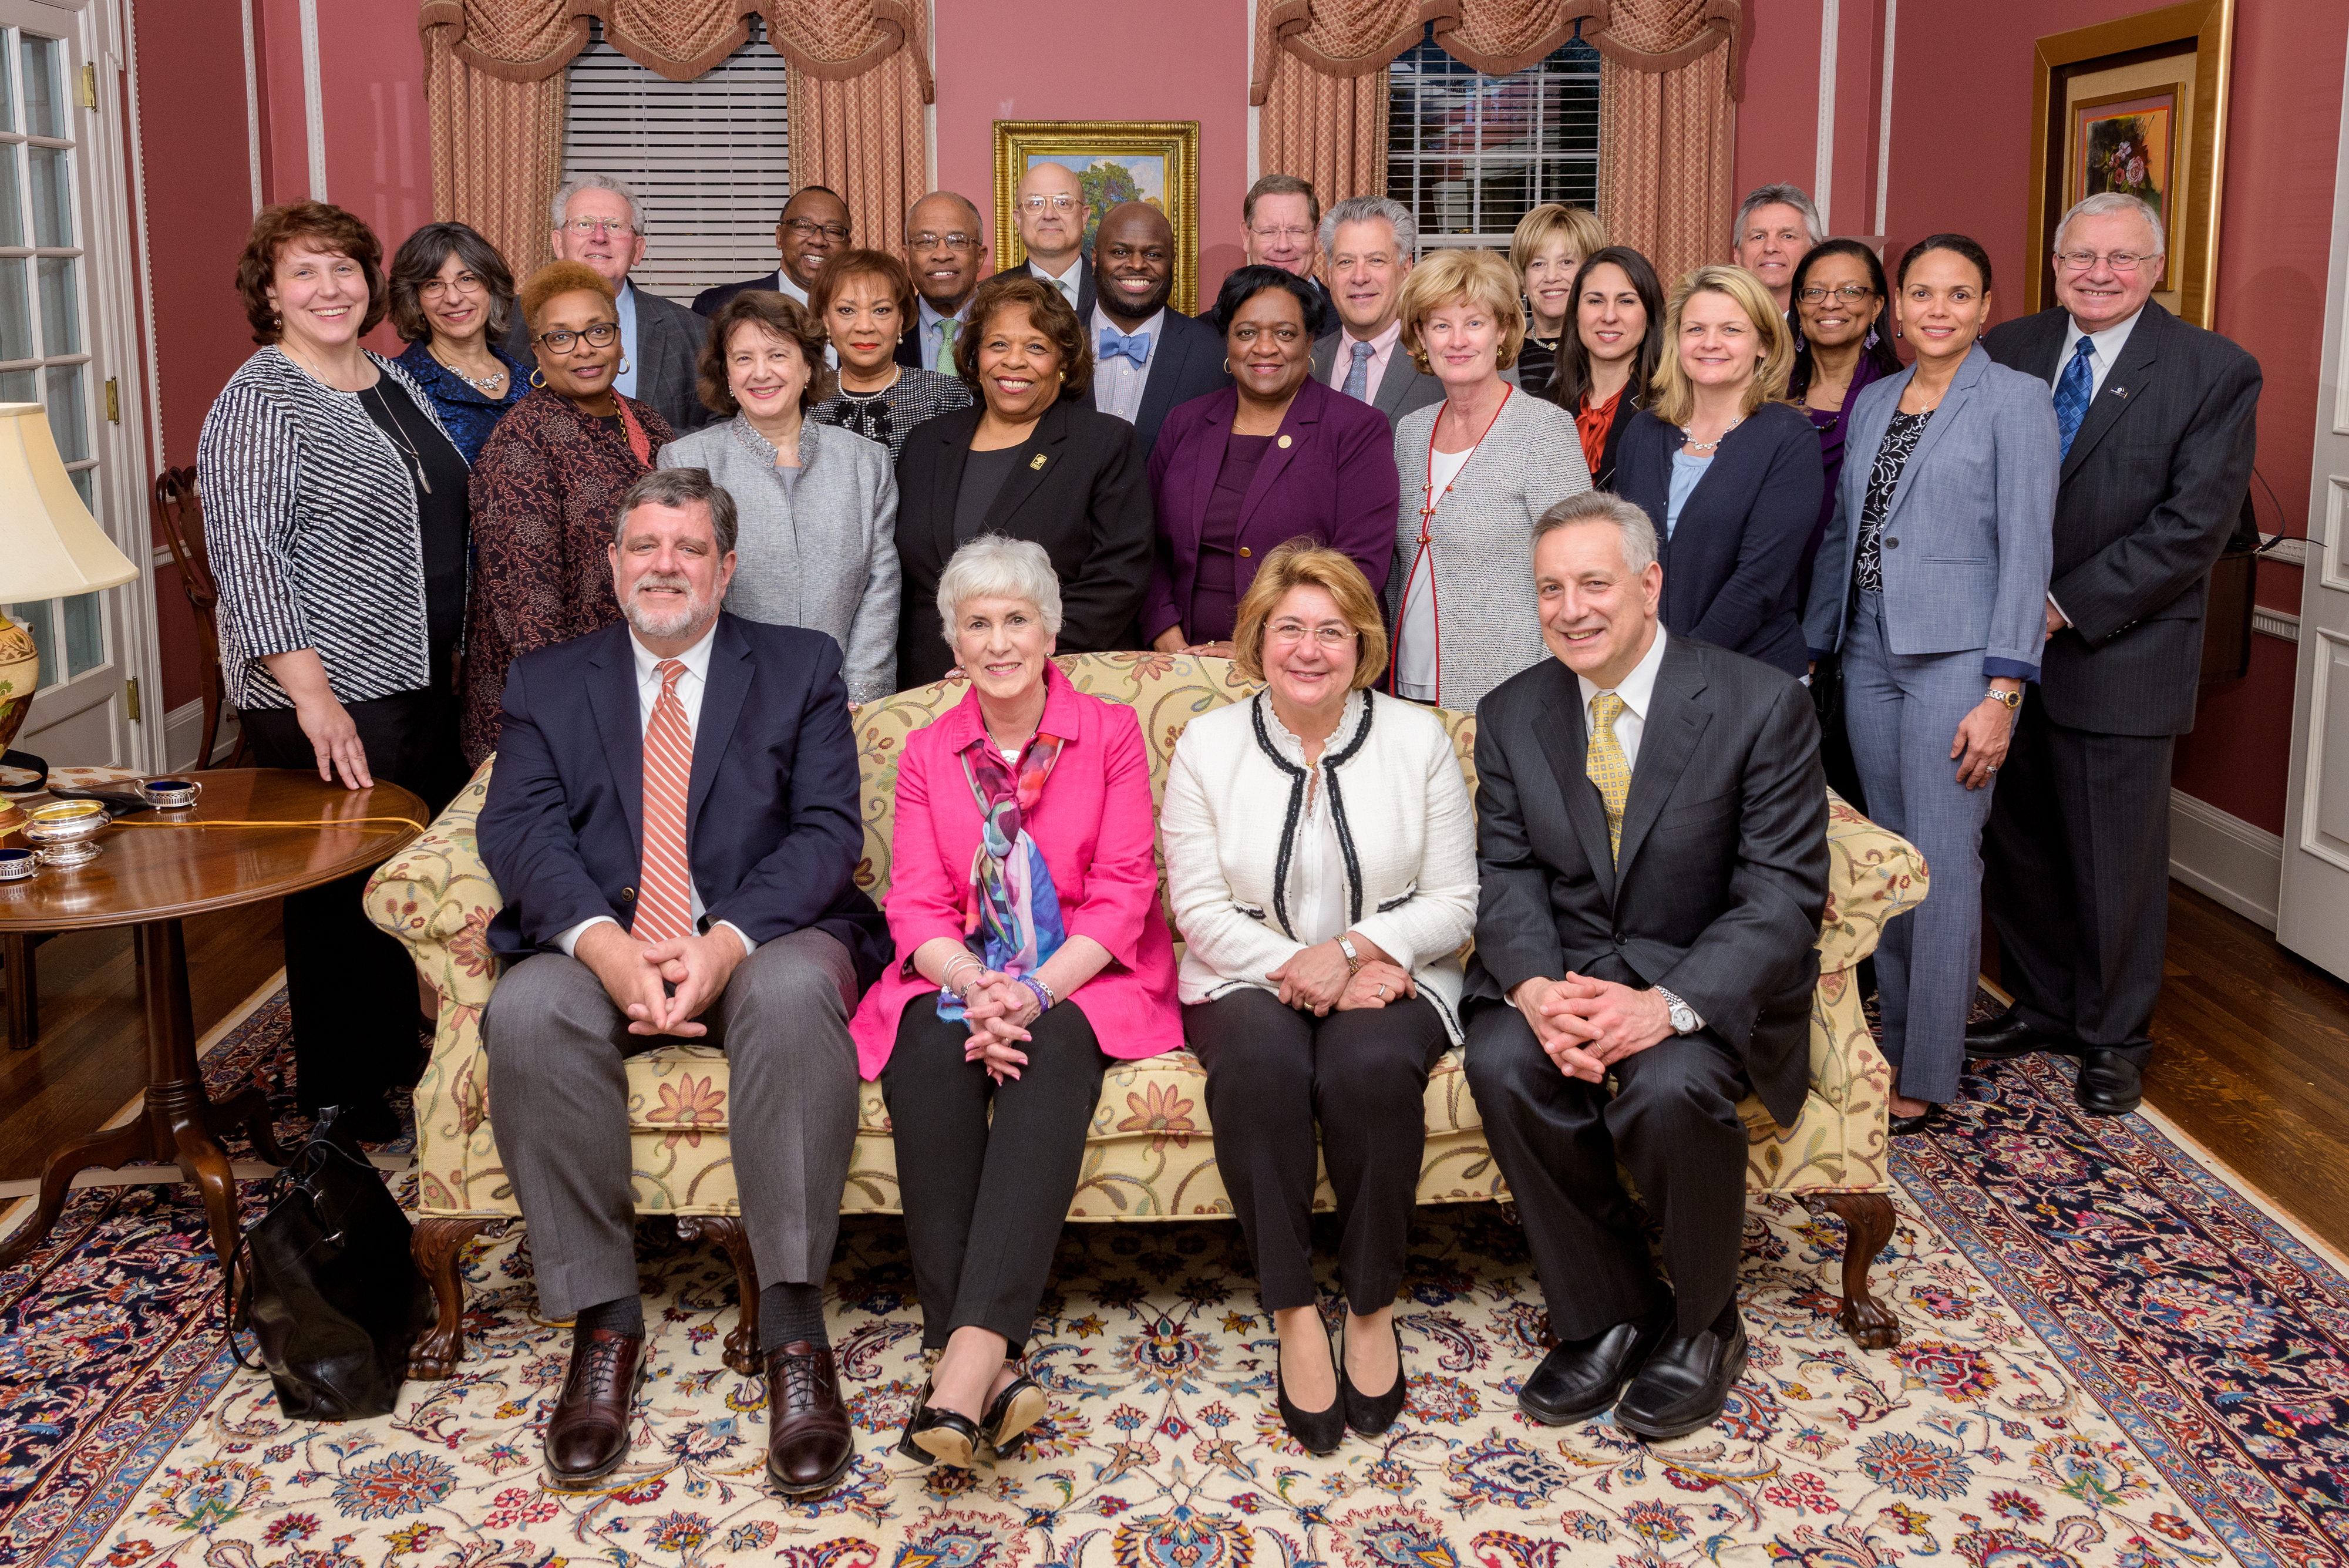 University President Wilma Mishoe and Provost Tony Allen (both in standing center) pose with other presidents and administrators whose institutions are a part of the Campus Compact Mid-Atlantic. During a Nov. 8 ceremony, the Compact presented Dr. Allen with its Civic Leadership Award.